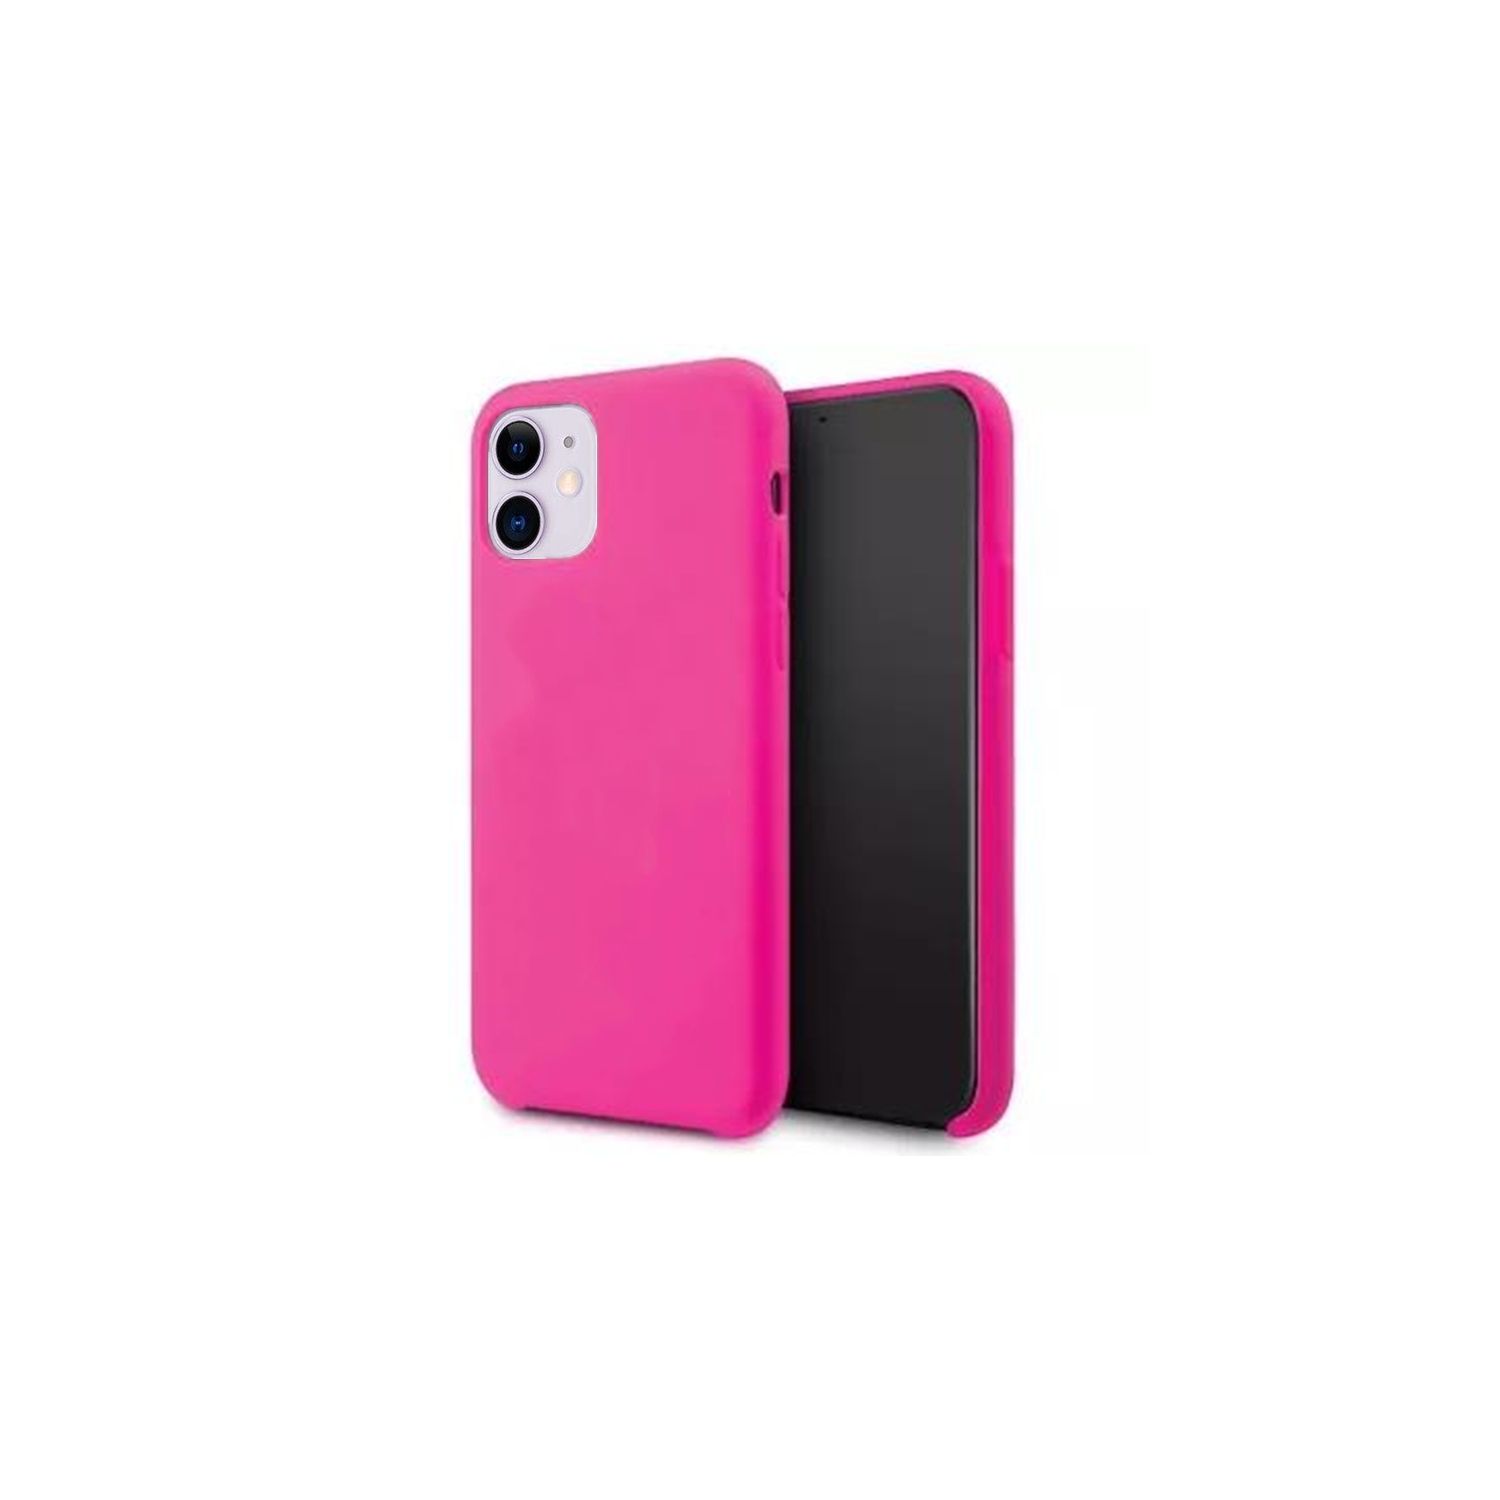 【CSmart】 Premium Silm Soft Liquid Silicone Gel Rubber Back Case Back Cover for iPhone 12 Mini (5.4"), Hot Pink